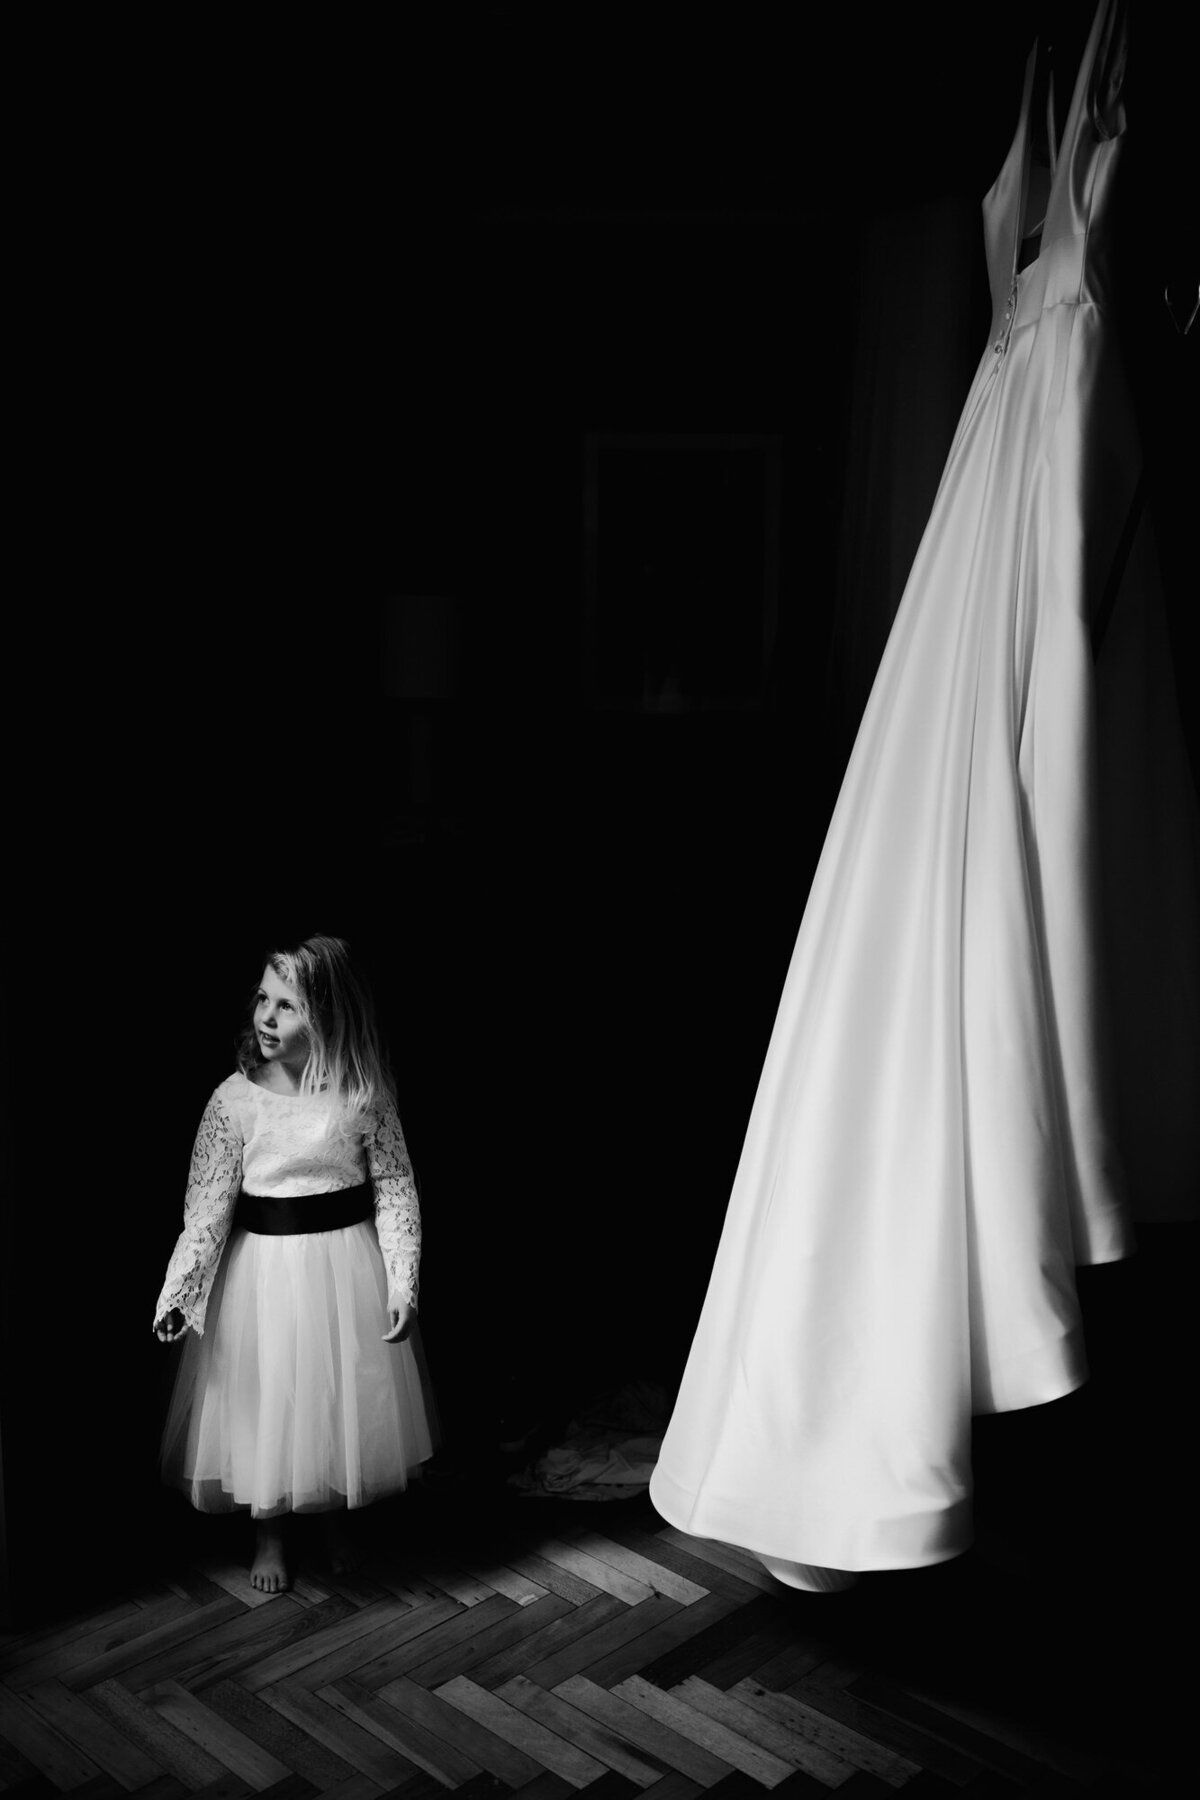 Black and white photo of young girl and brides wedding dress